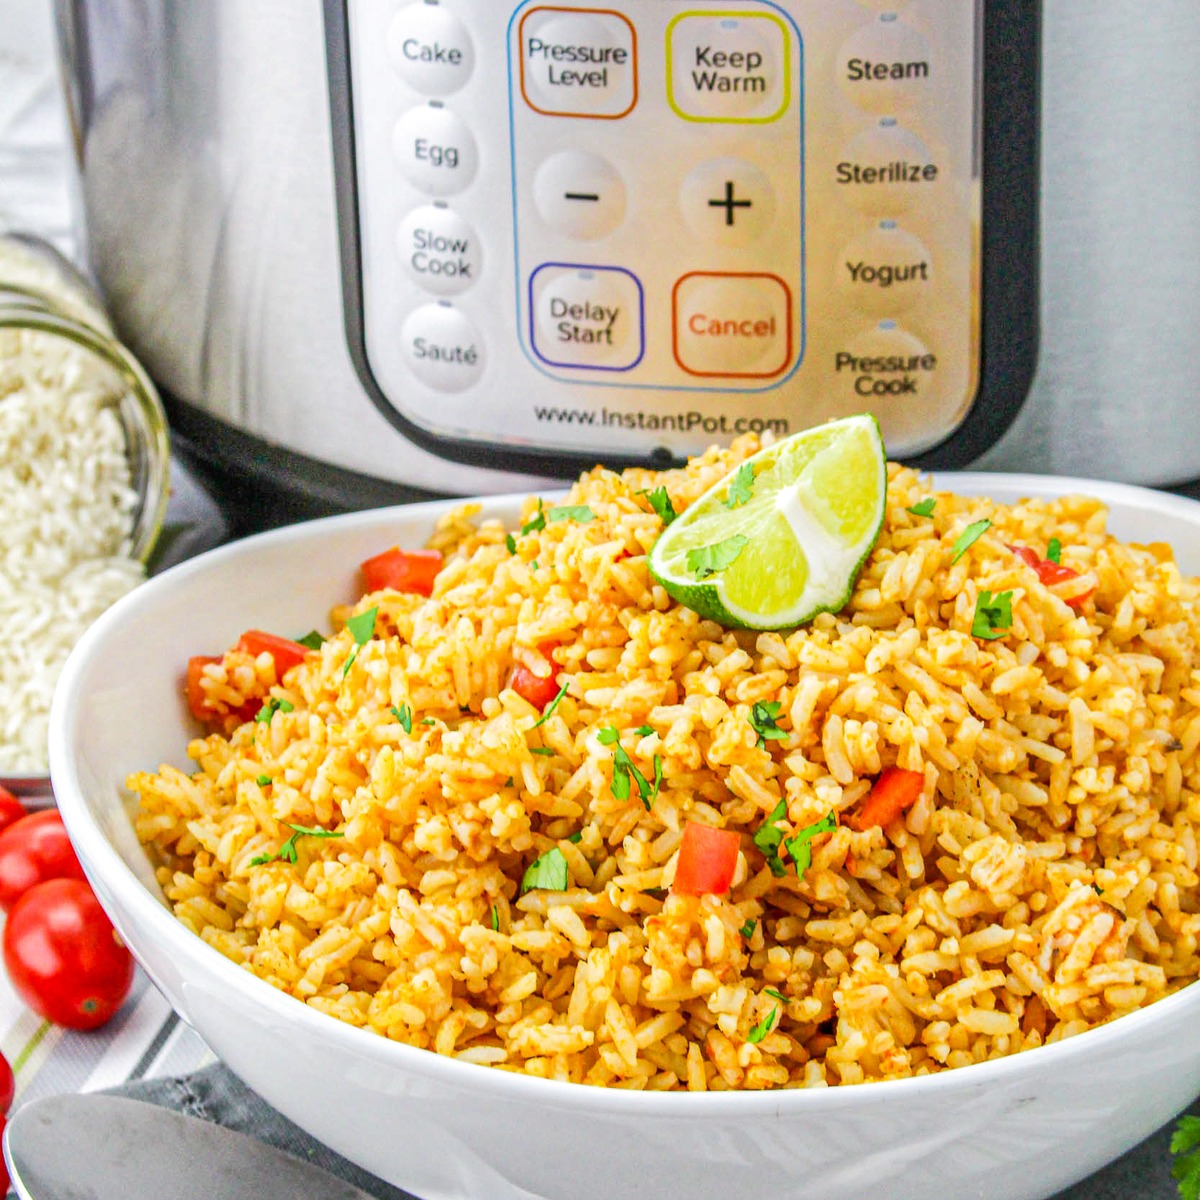 Easy 30-Minute Instant Pot Mexican Rice Recipe – Unsophisticook